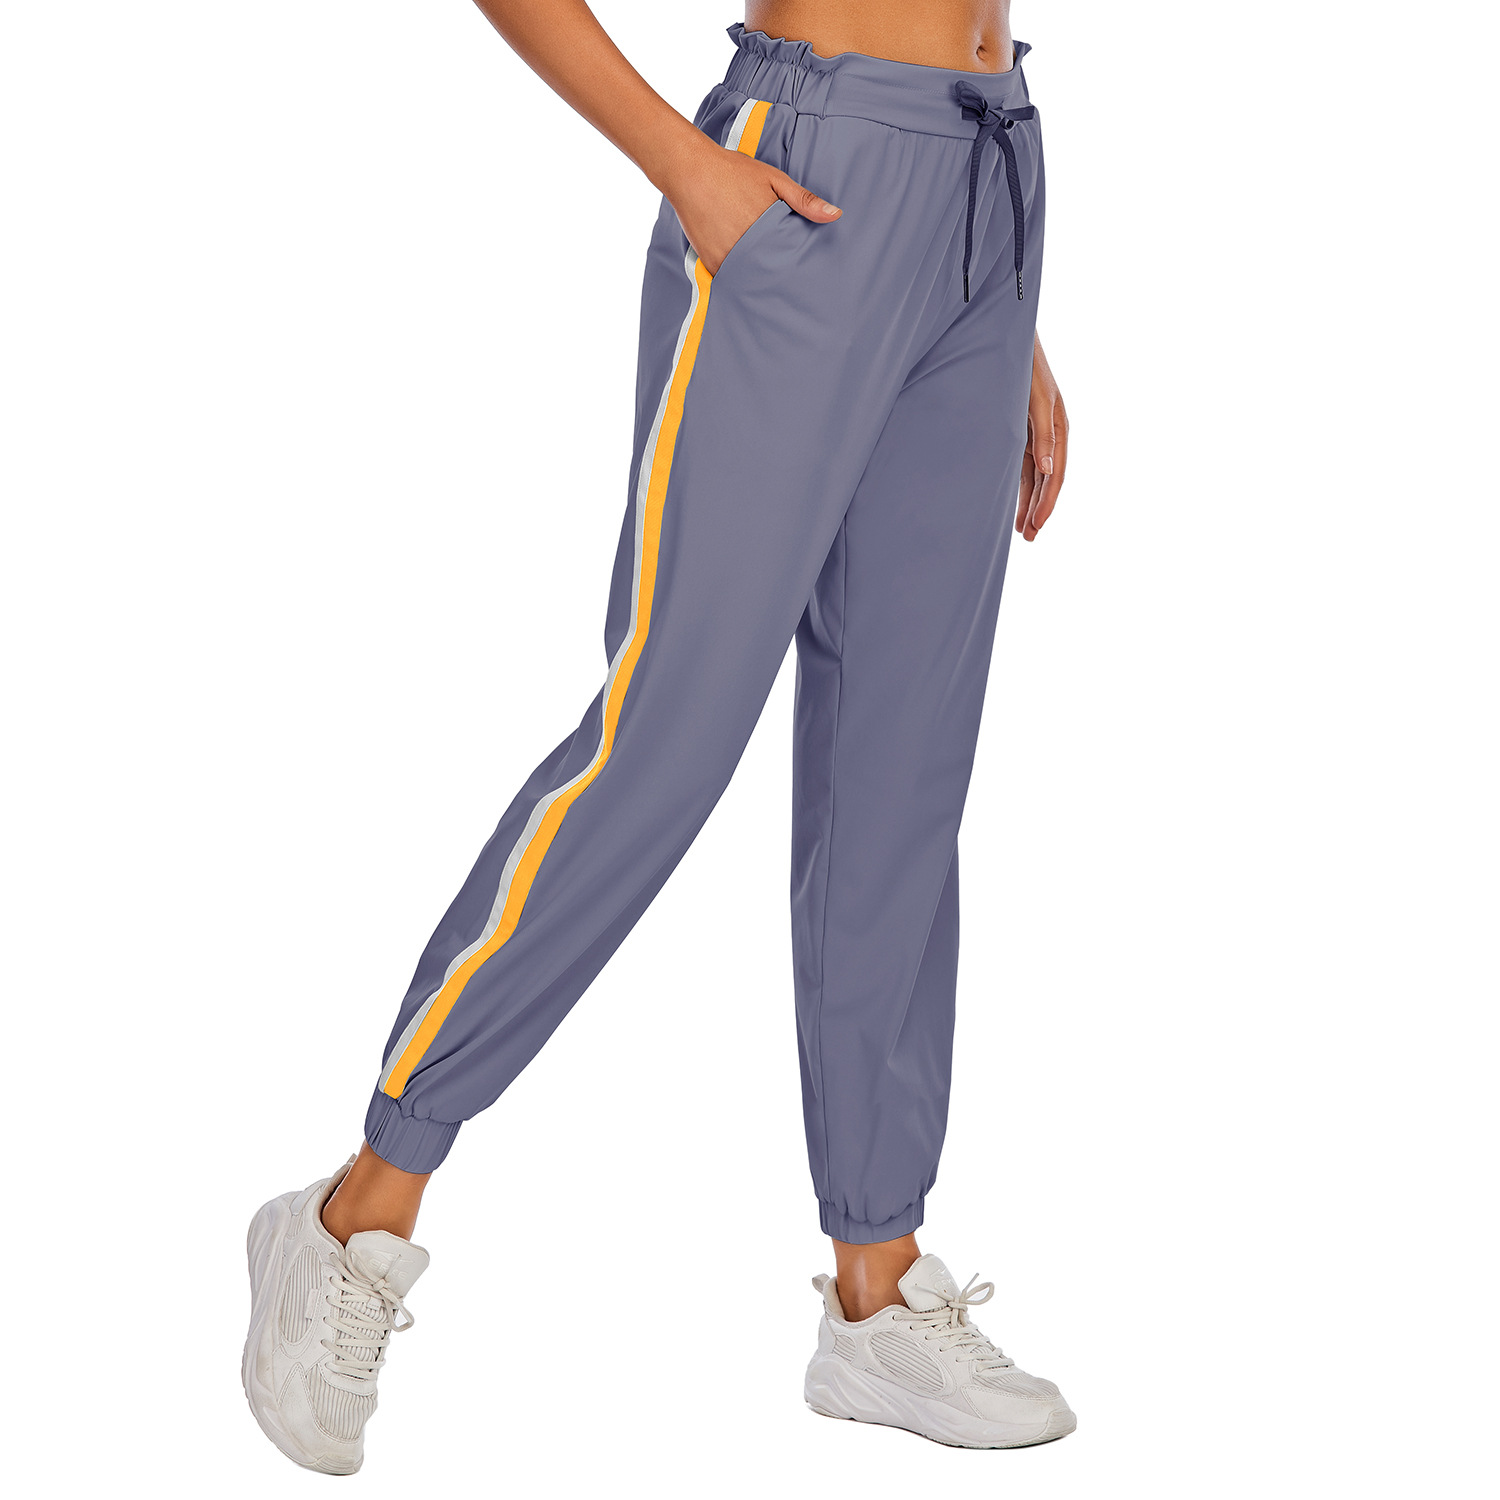 Waist collection color matching thin sports fitness pants female B158